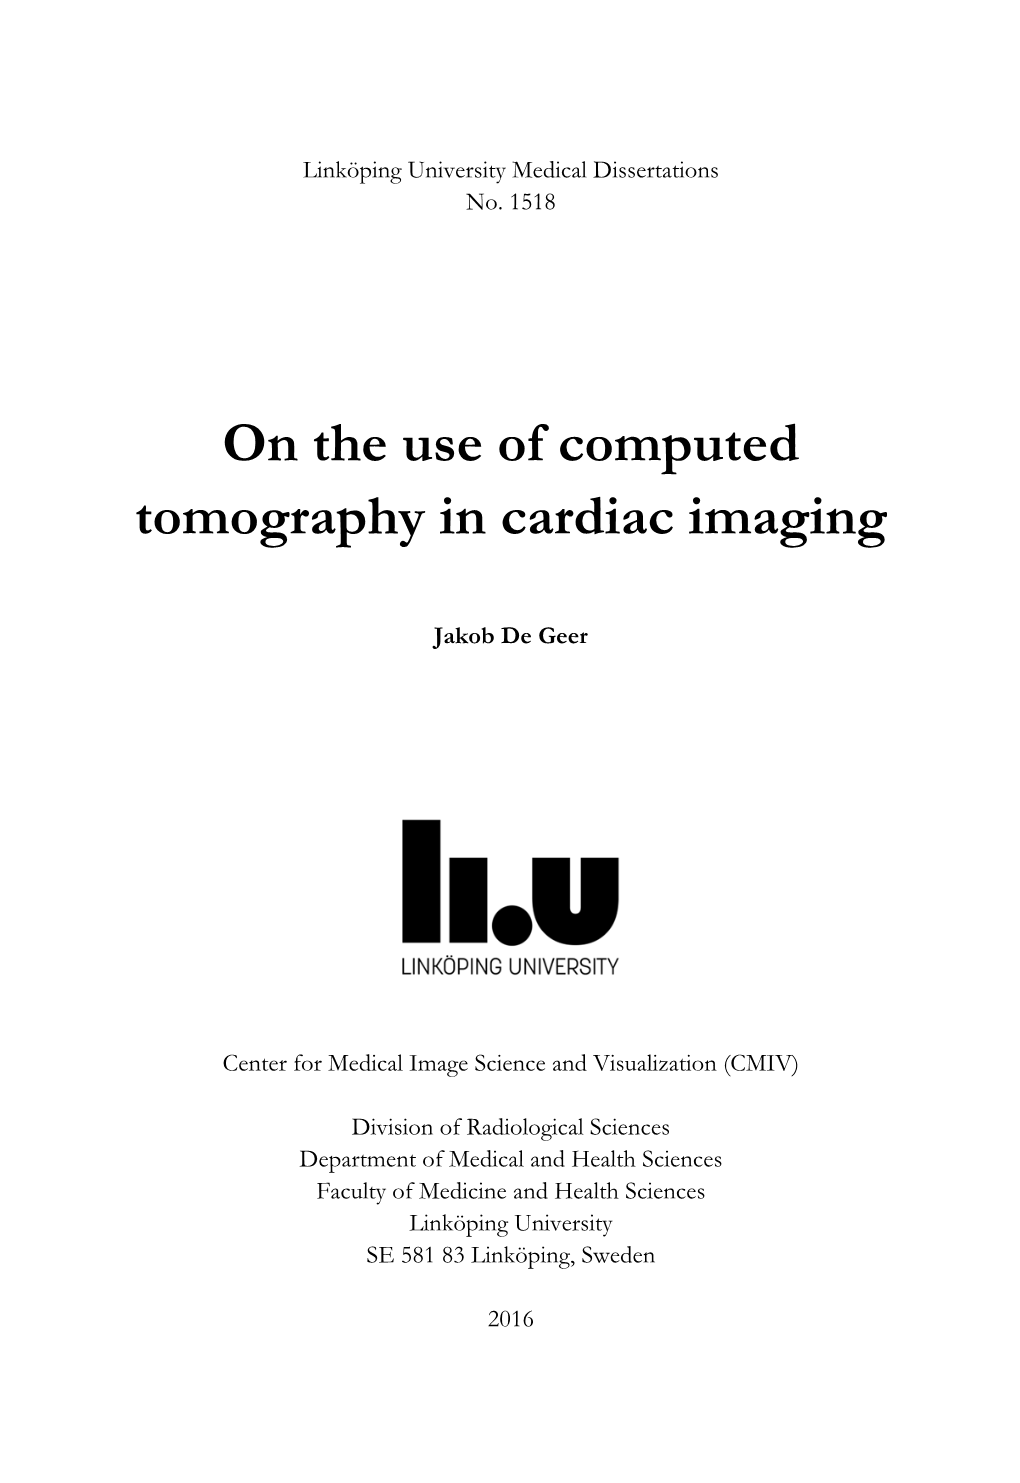 On the Use of Computed Tomography in Cardiac Imaging